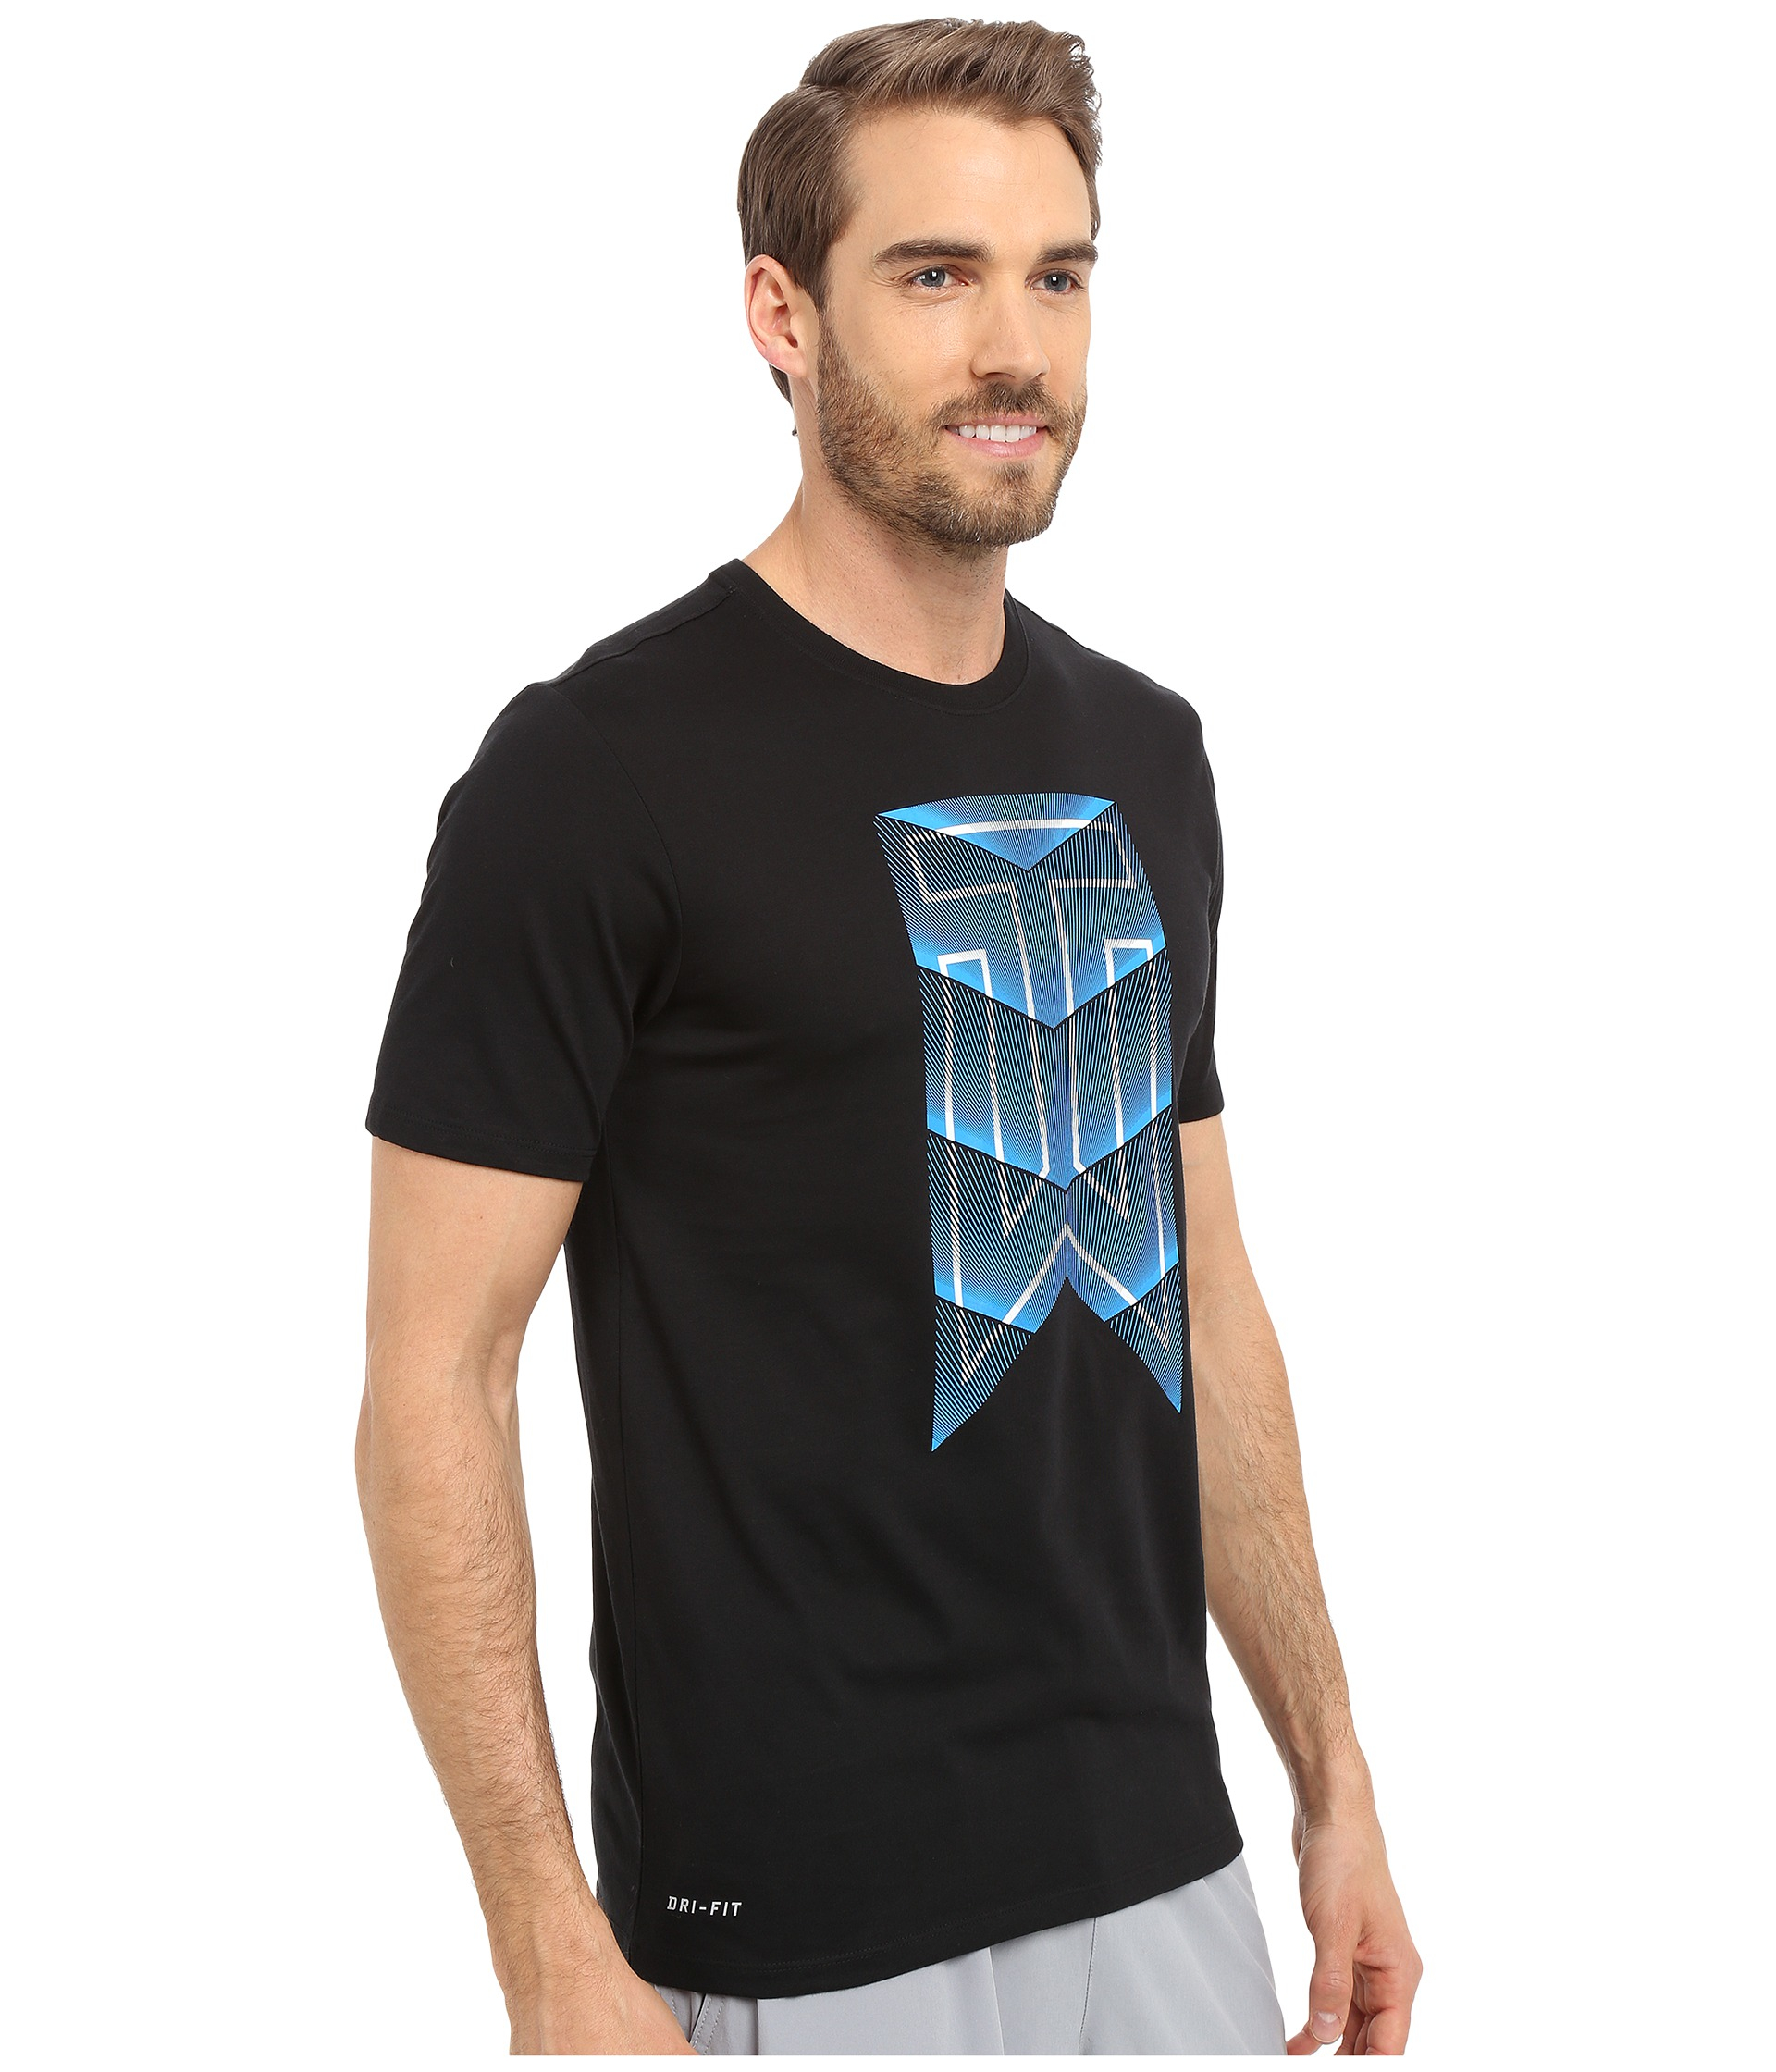 Lyst - Nike Tiger Woods Graphic Tee in Black for Men